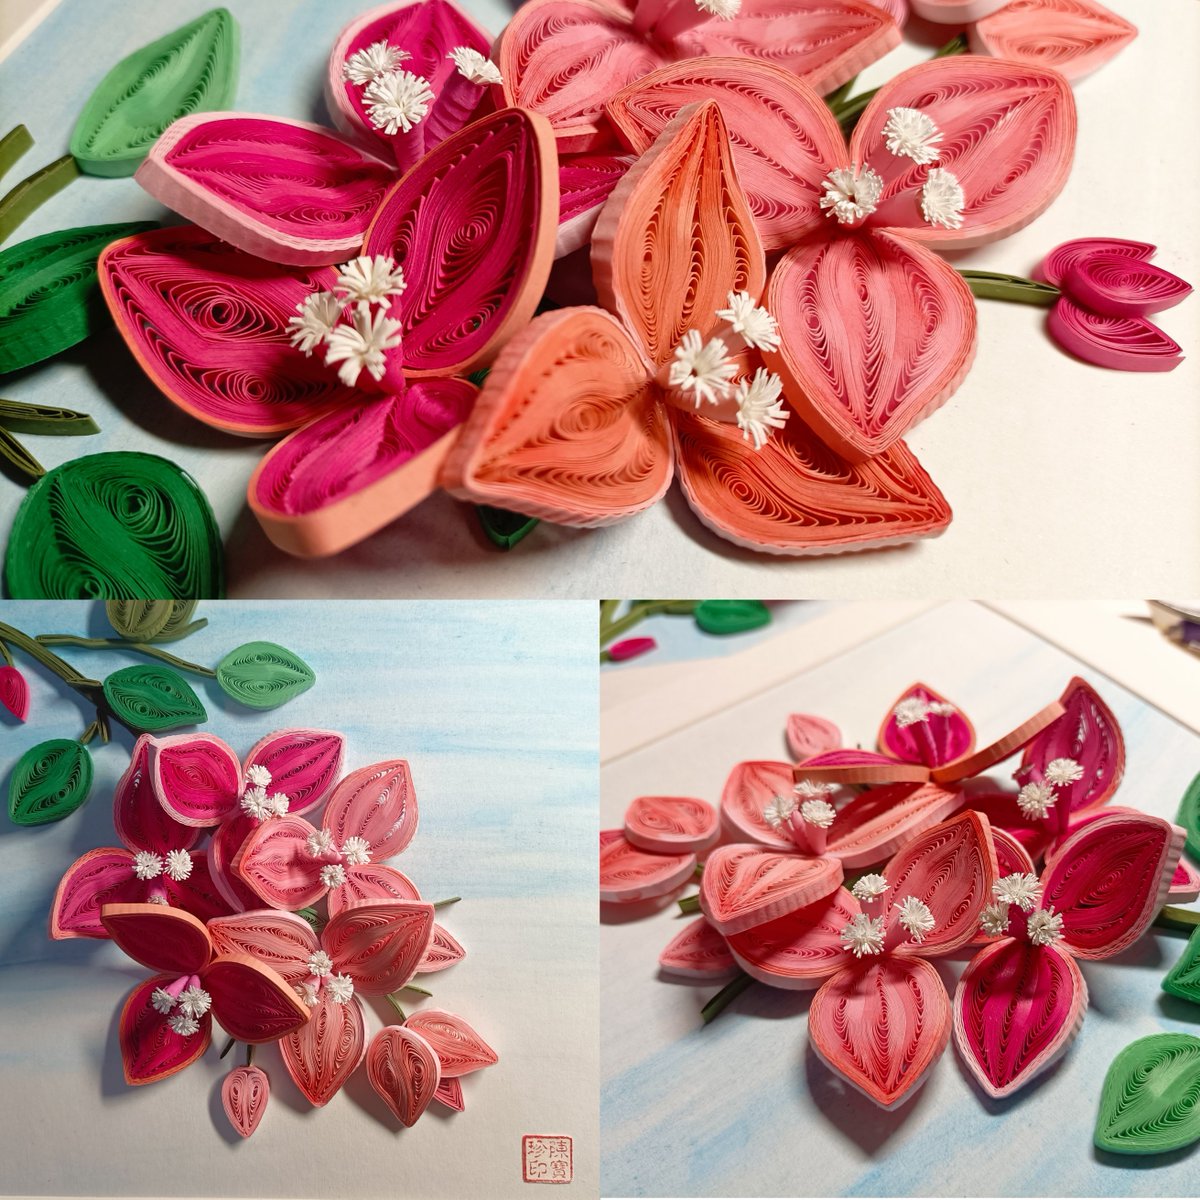 Spring flew by quickly, and it’s hard to retain fallen petals. In Xiamen, an artist Ms. Chen Baozhen memorized the blooming flowers by quilling paper. She puts so much passion and creativity into her work, showing love to her hometown, Xiamen. #VisitXiamen #LifeinSeasideGarden